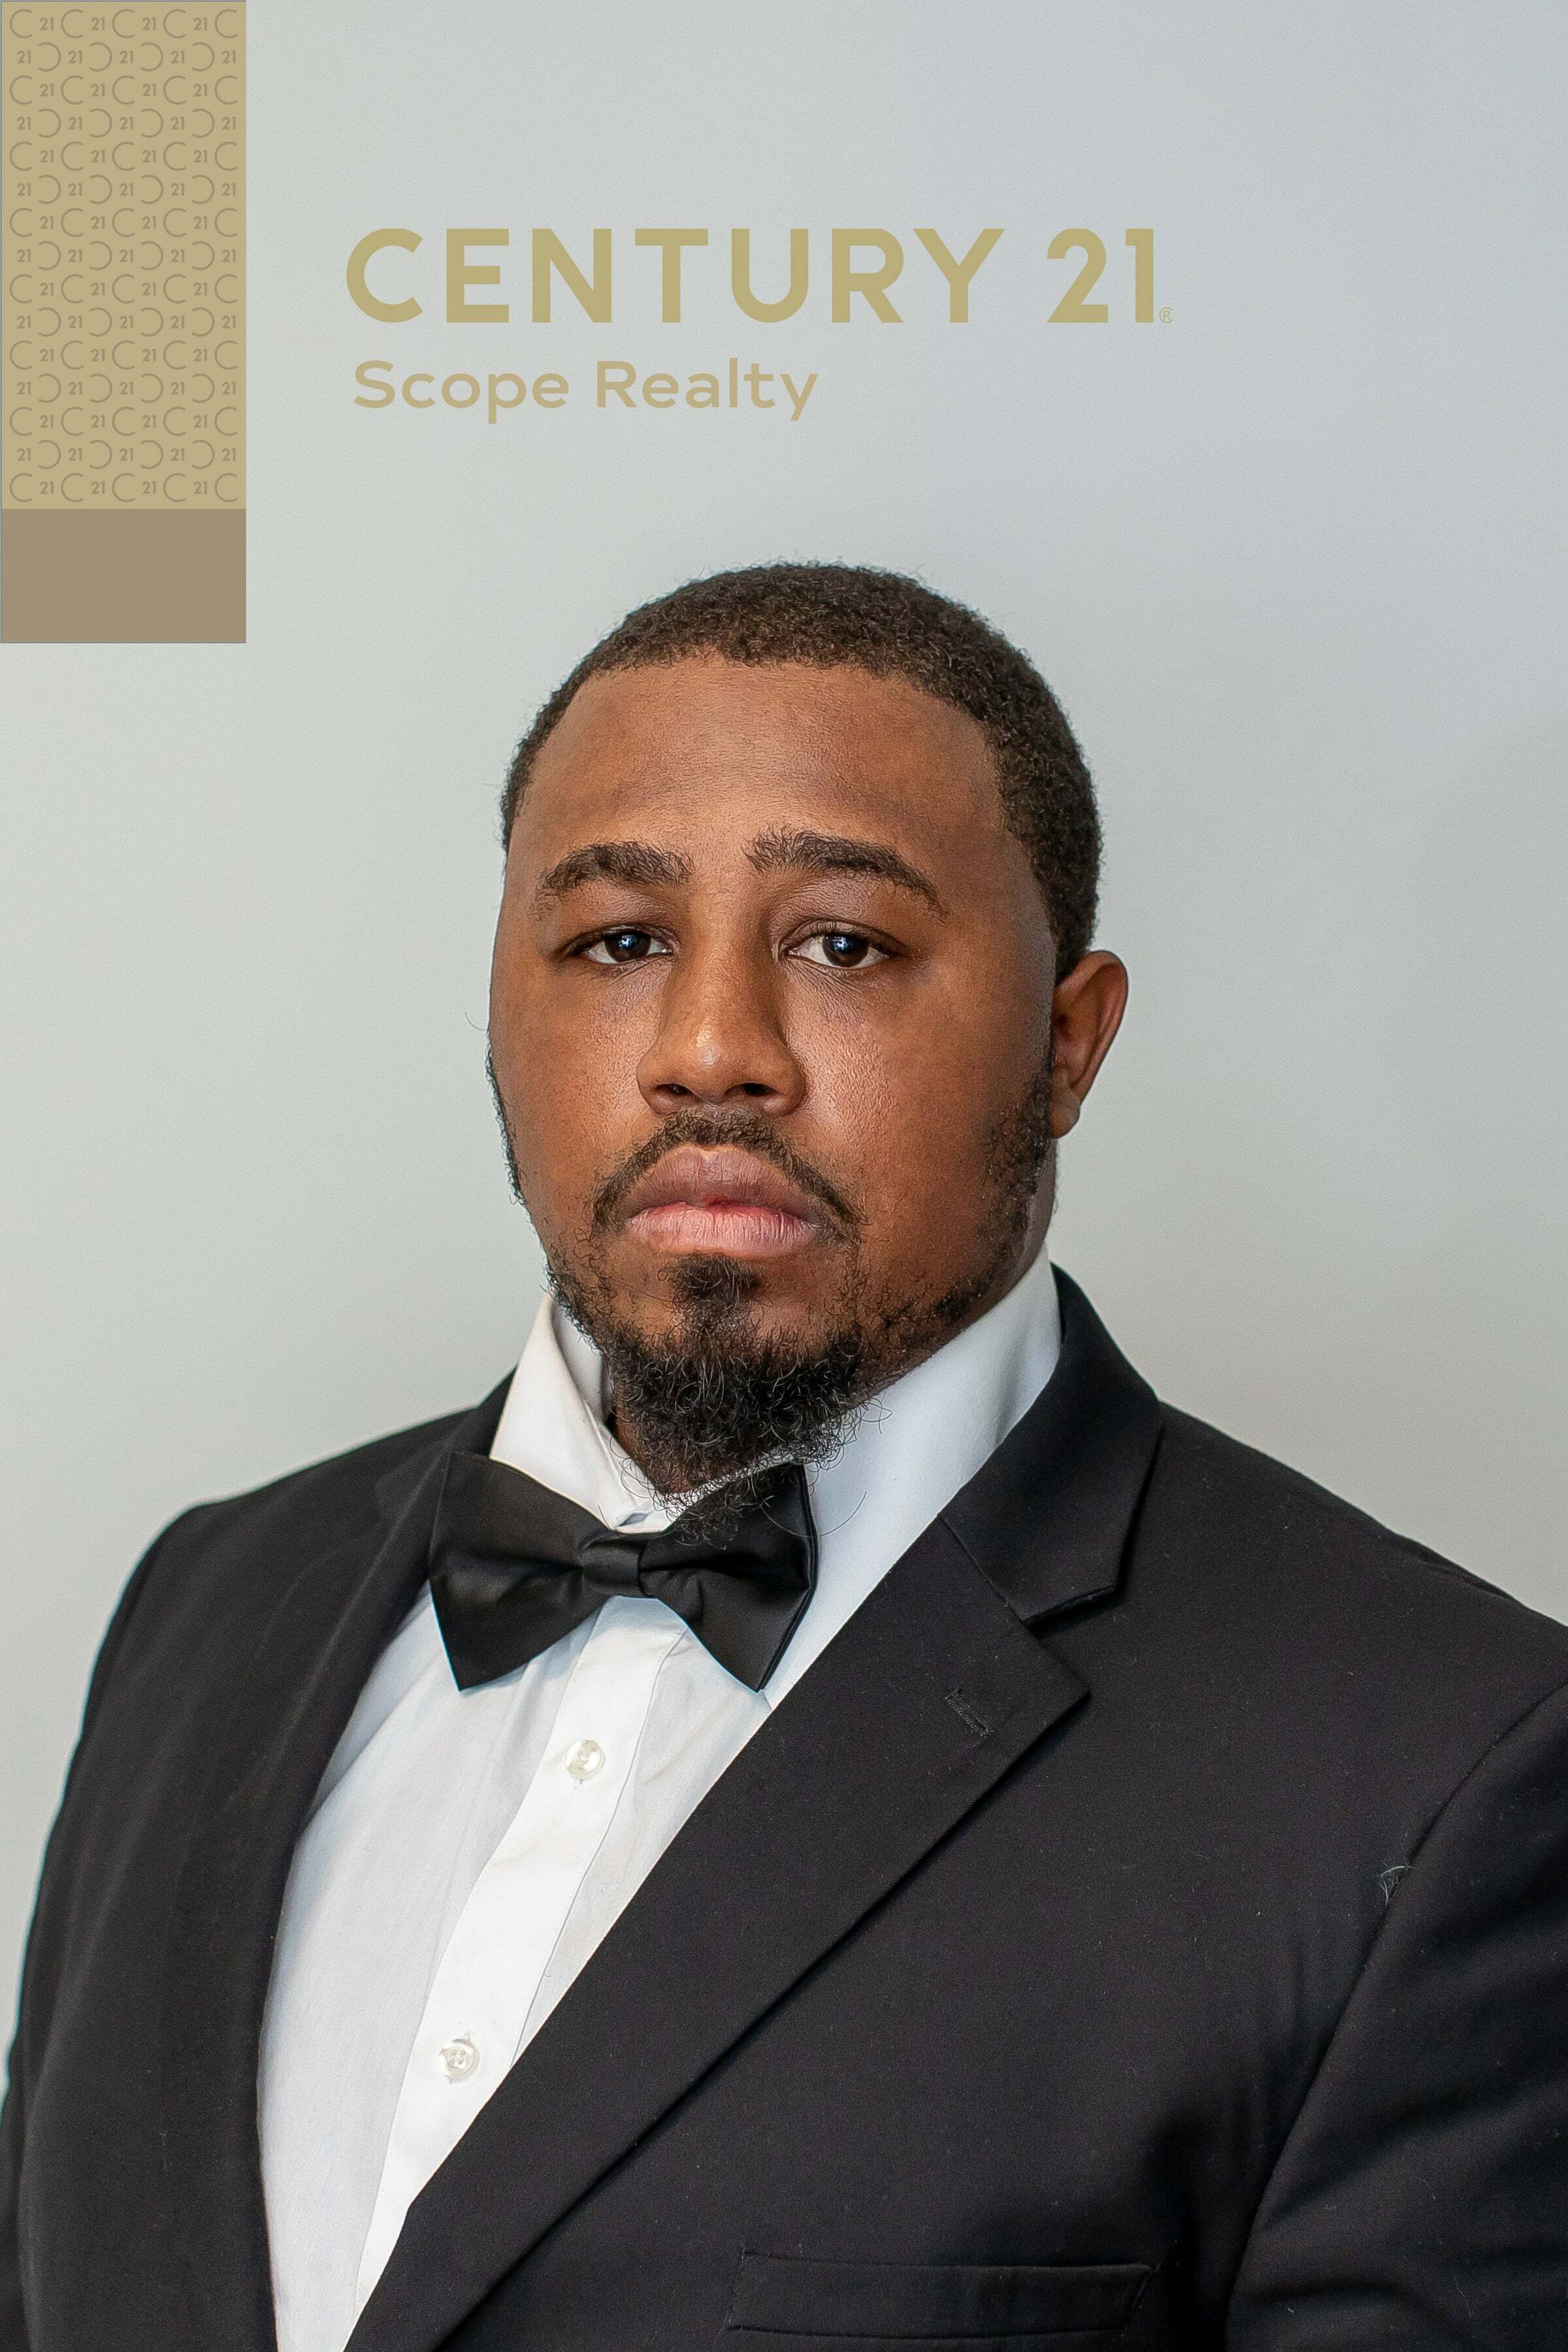 Dontarius Maxwell, Real Estate Salesperson in Bronx, Scope Realty